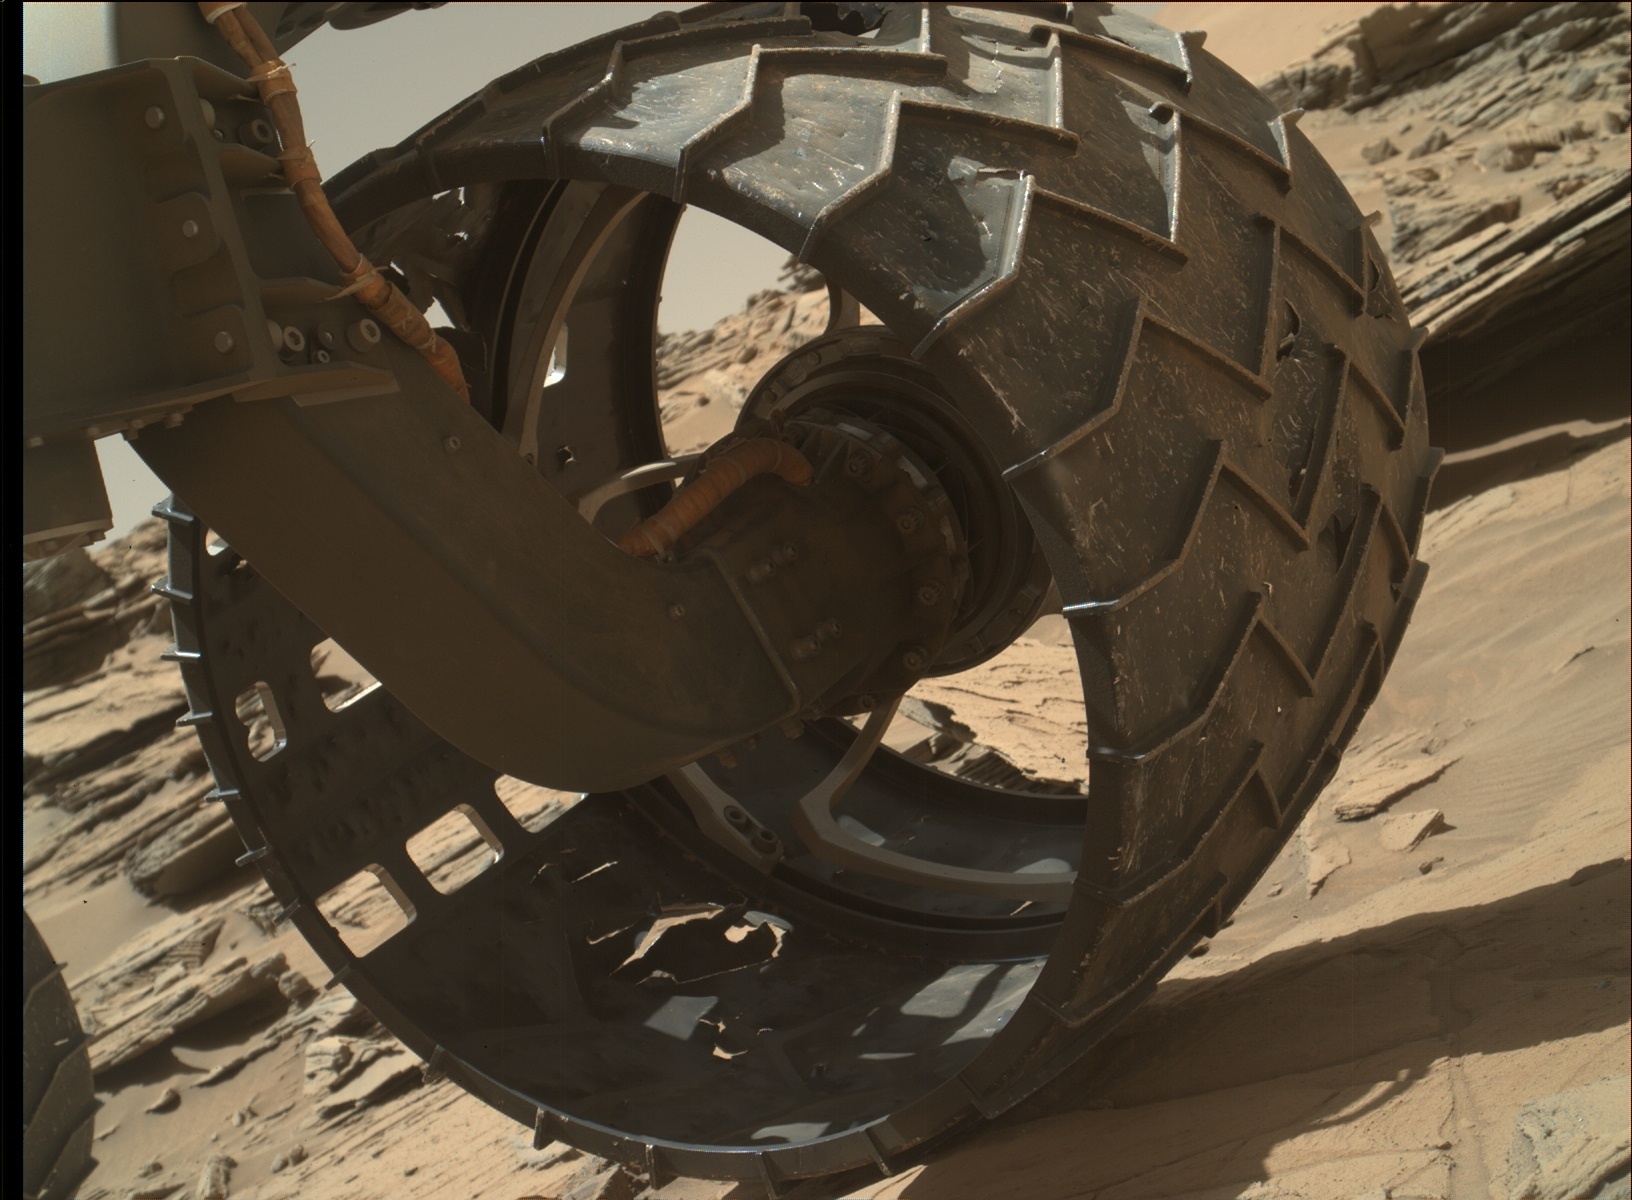 Nasa's Mars rover Curiosity acquired this image using its Mars Hand Lens Imager (MAHLI) on Sol 1315